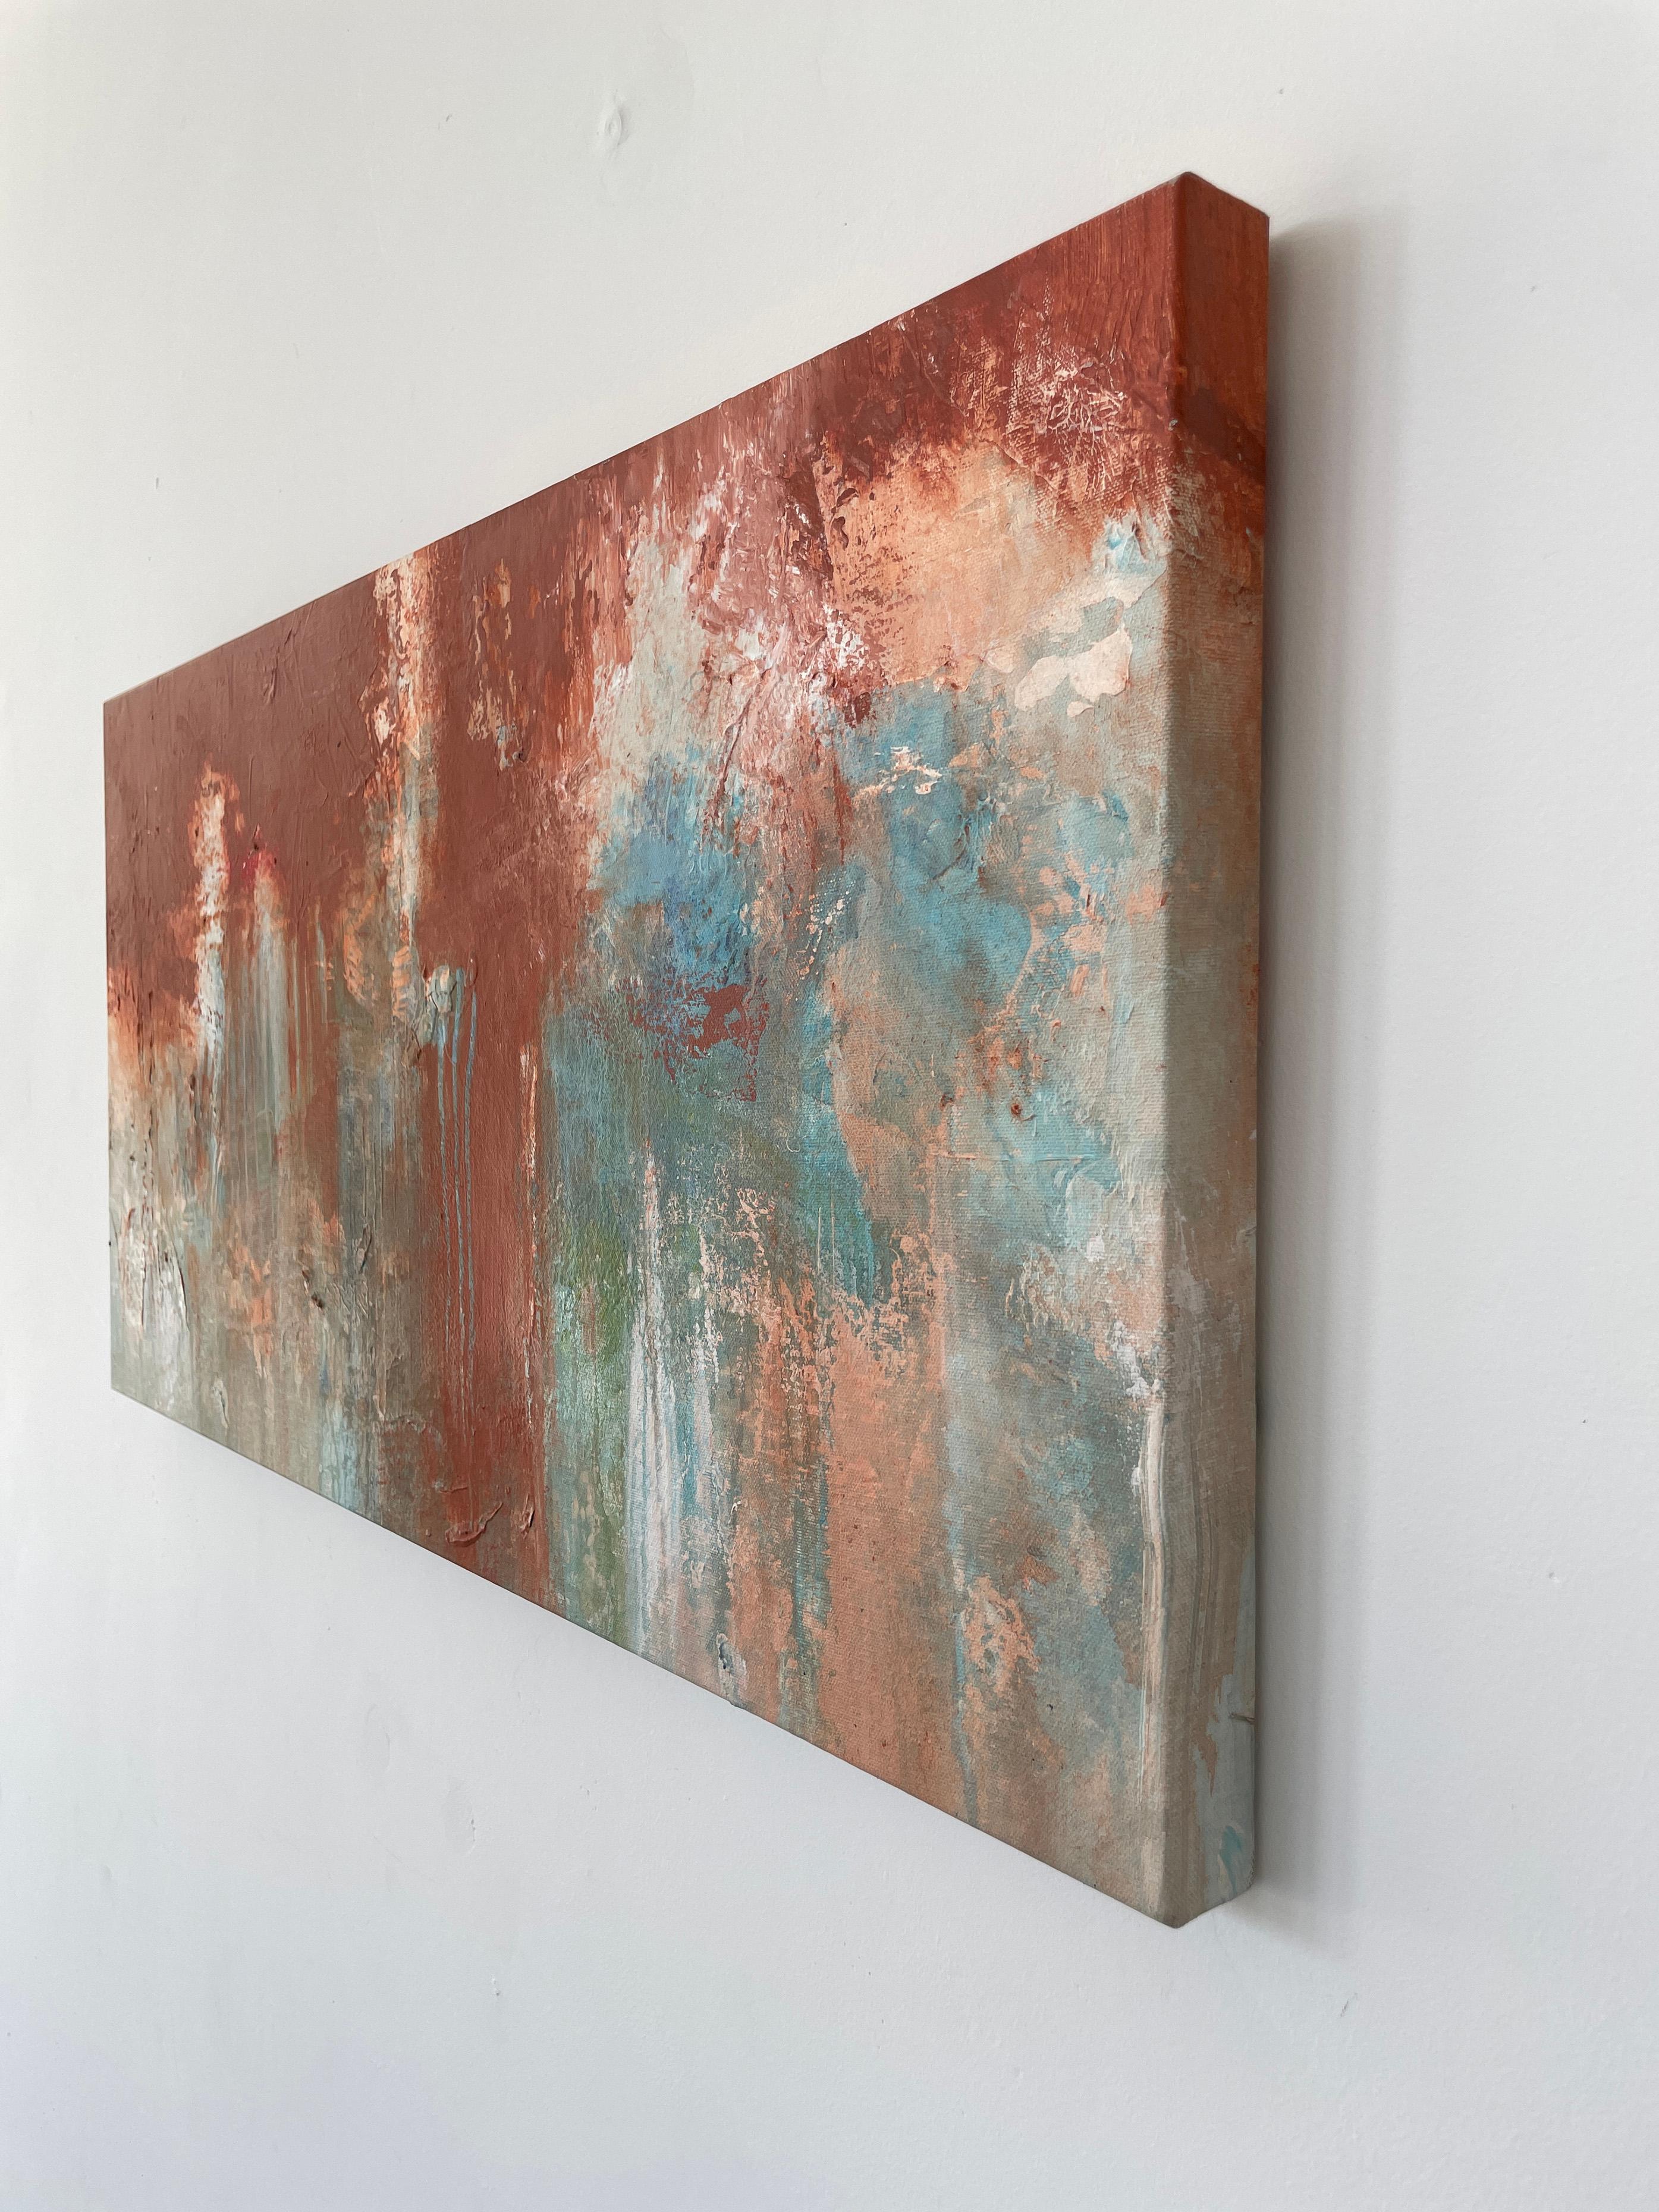 Water and Light, Untitled #4- acrylic on canvas - Brown Abstract Painting by Stephanie Visser 